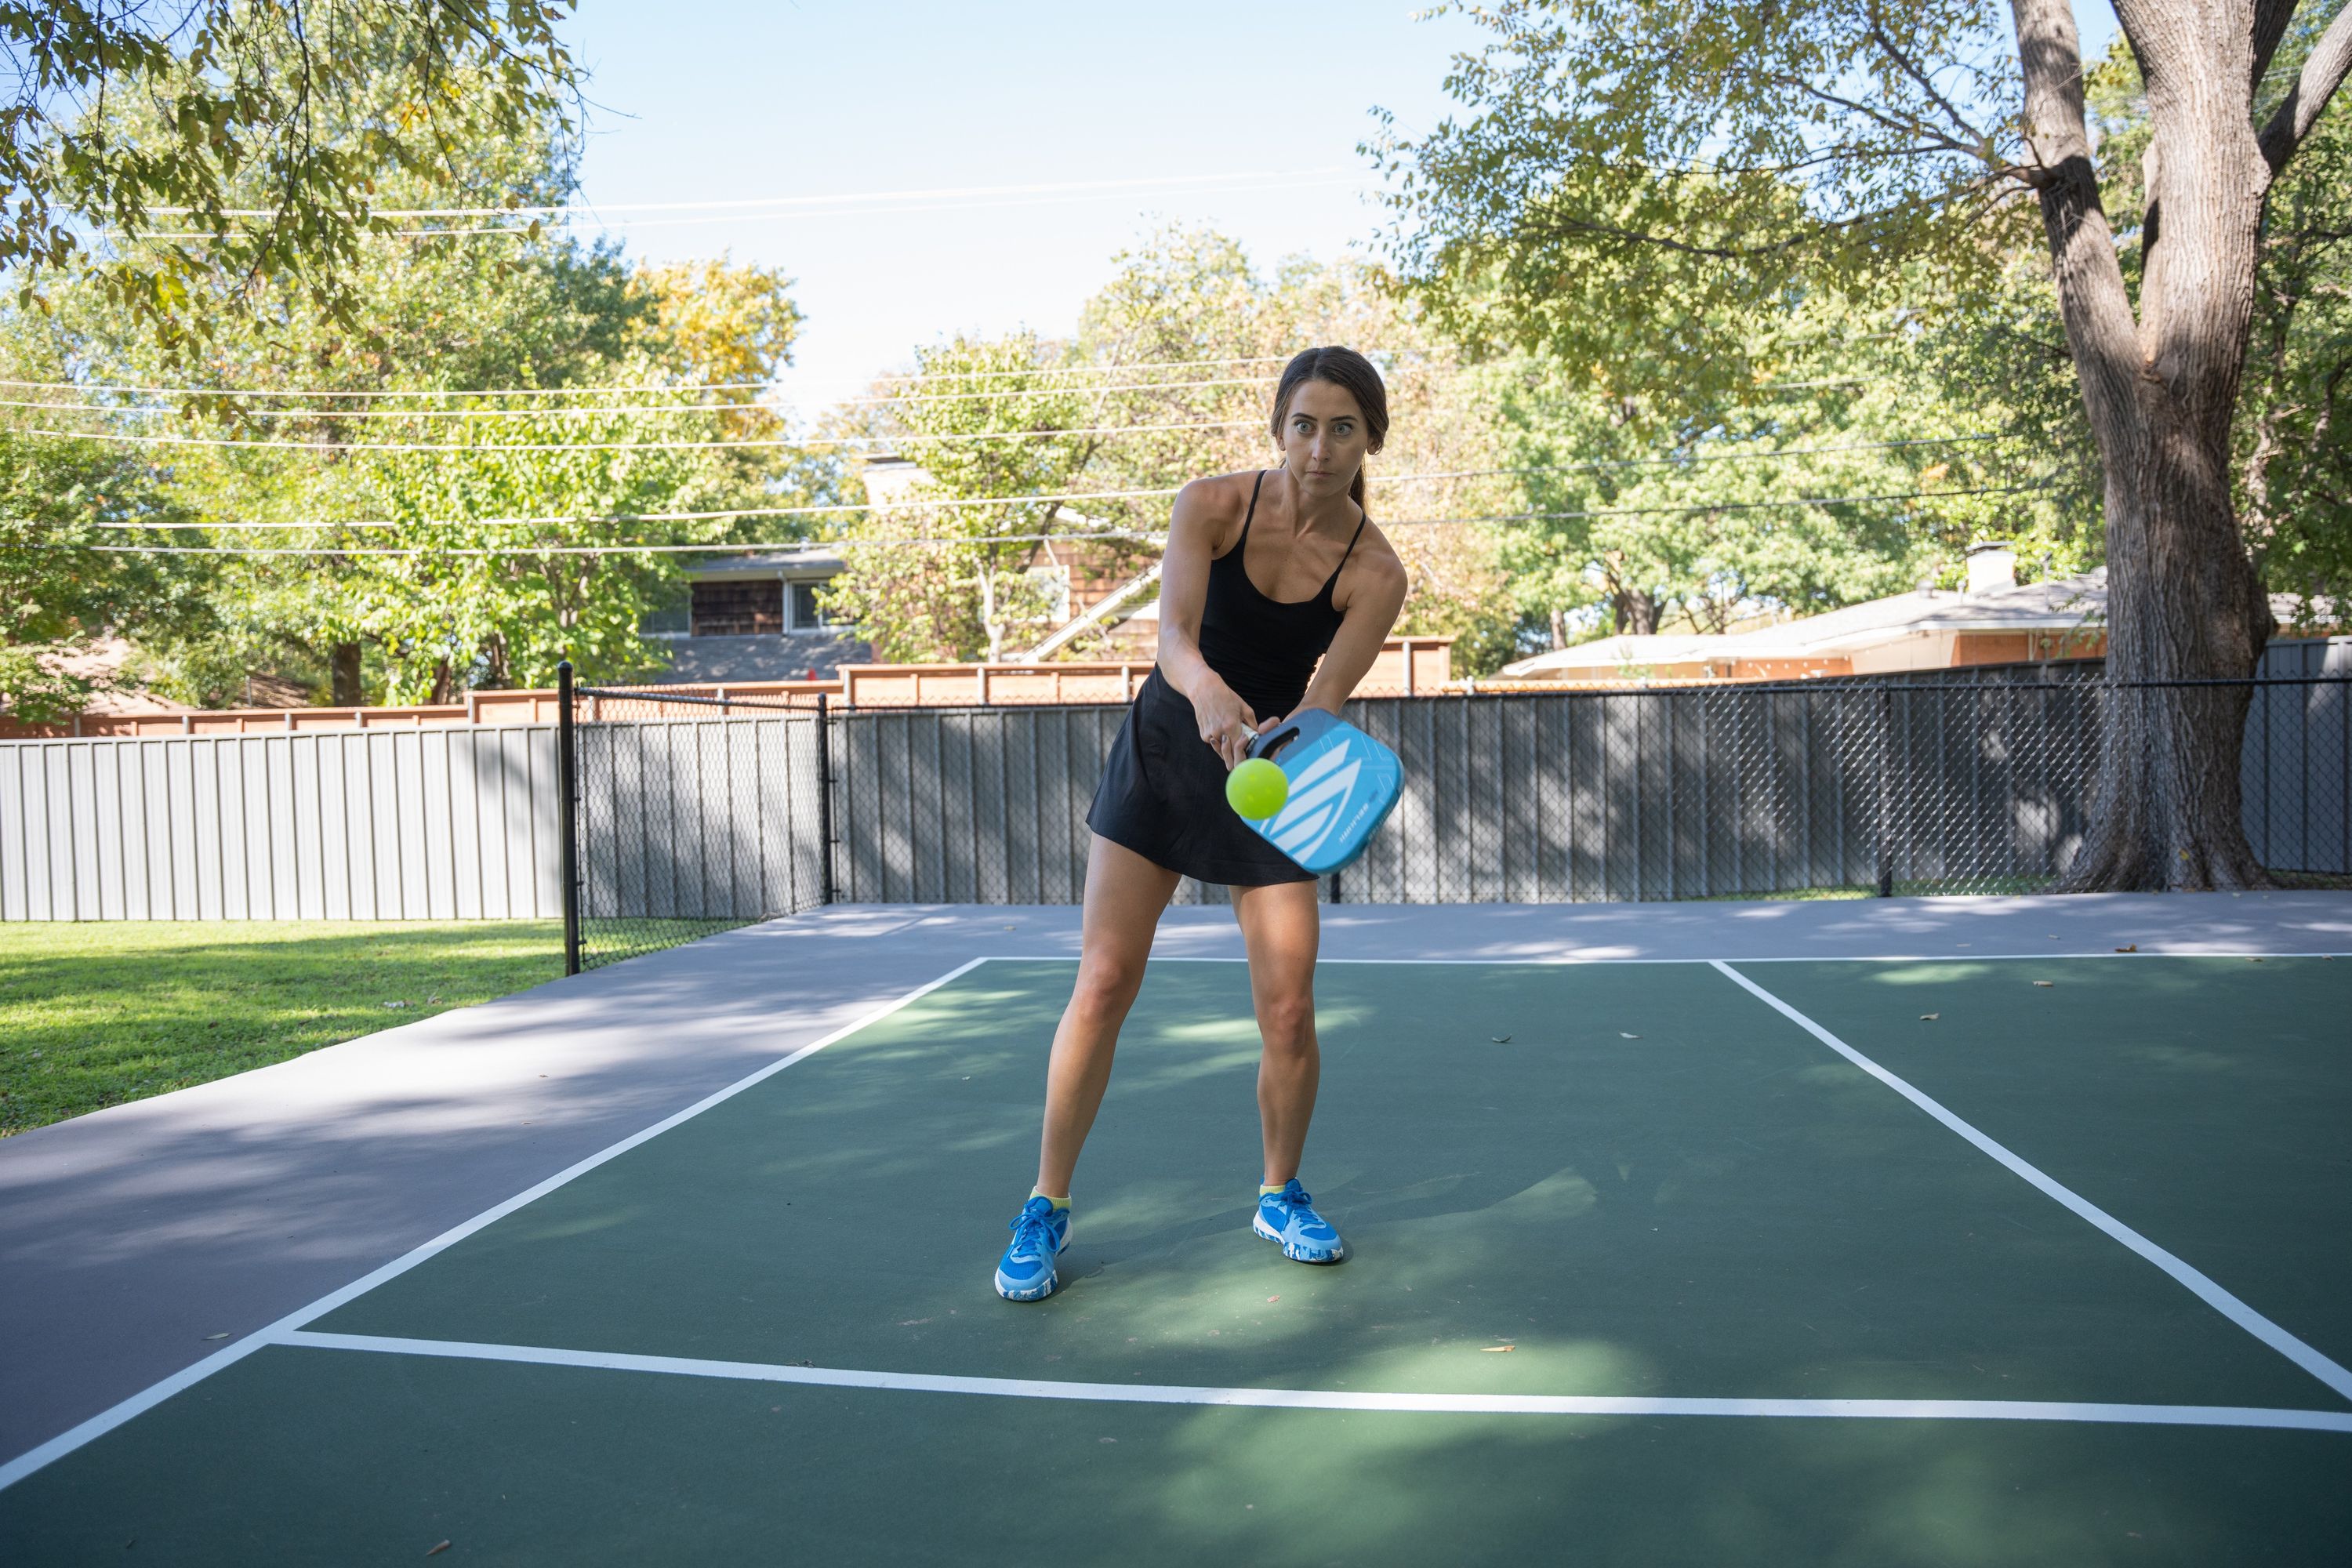 Skinny singles in pickleball, or mini-singles, is a form of singles pickleball where you do not use the entire pickleball court.